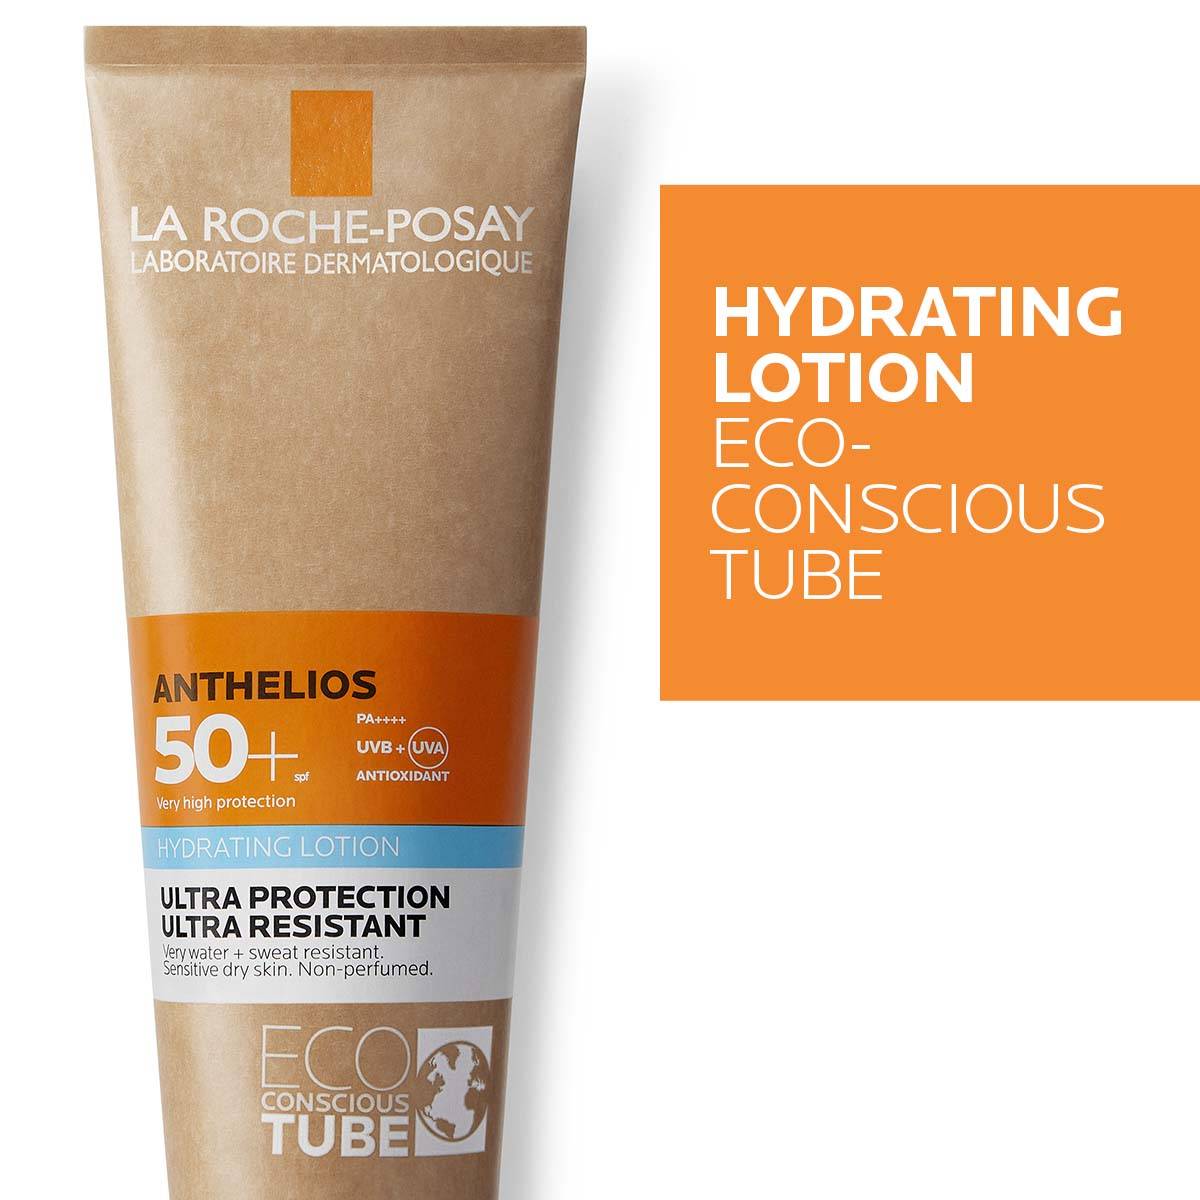 La Roche Posay Anthelios 50+ Hydrating Lotion Sun Protection - 250ml